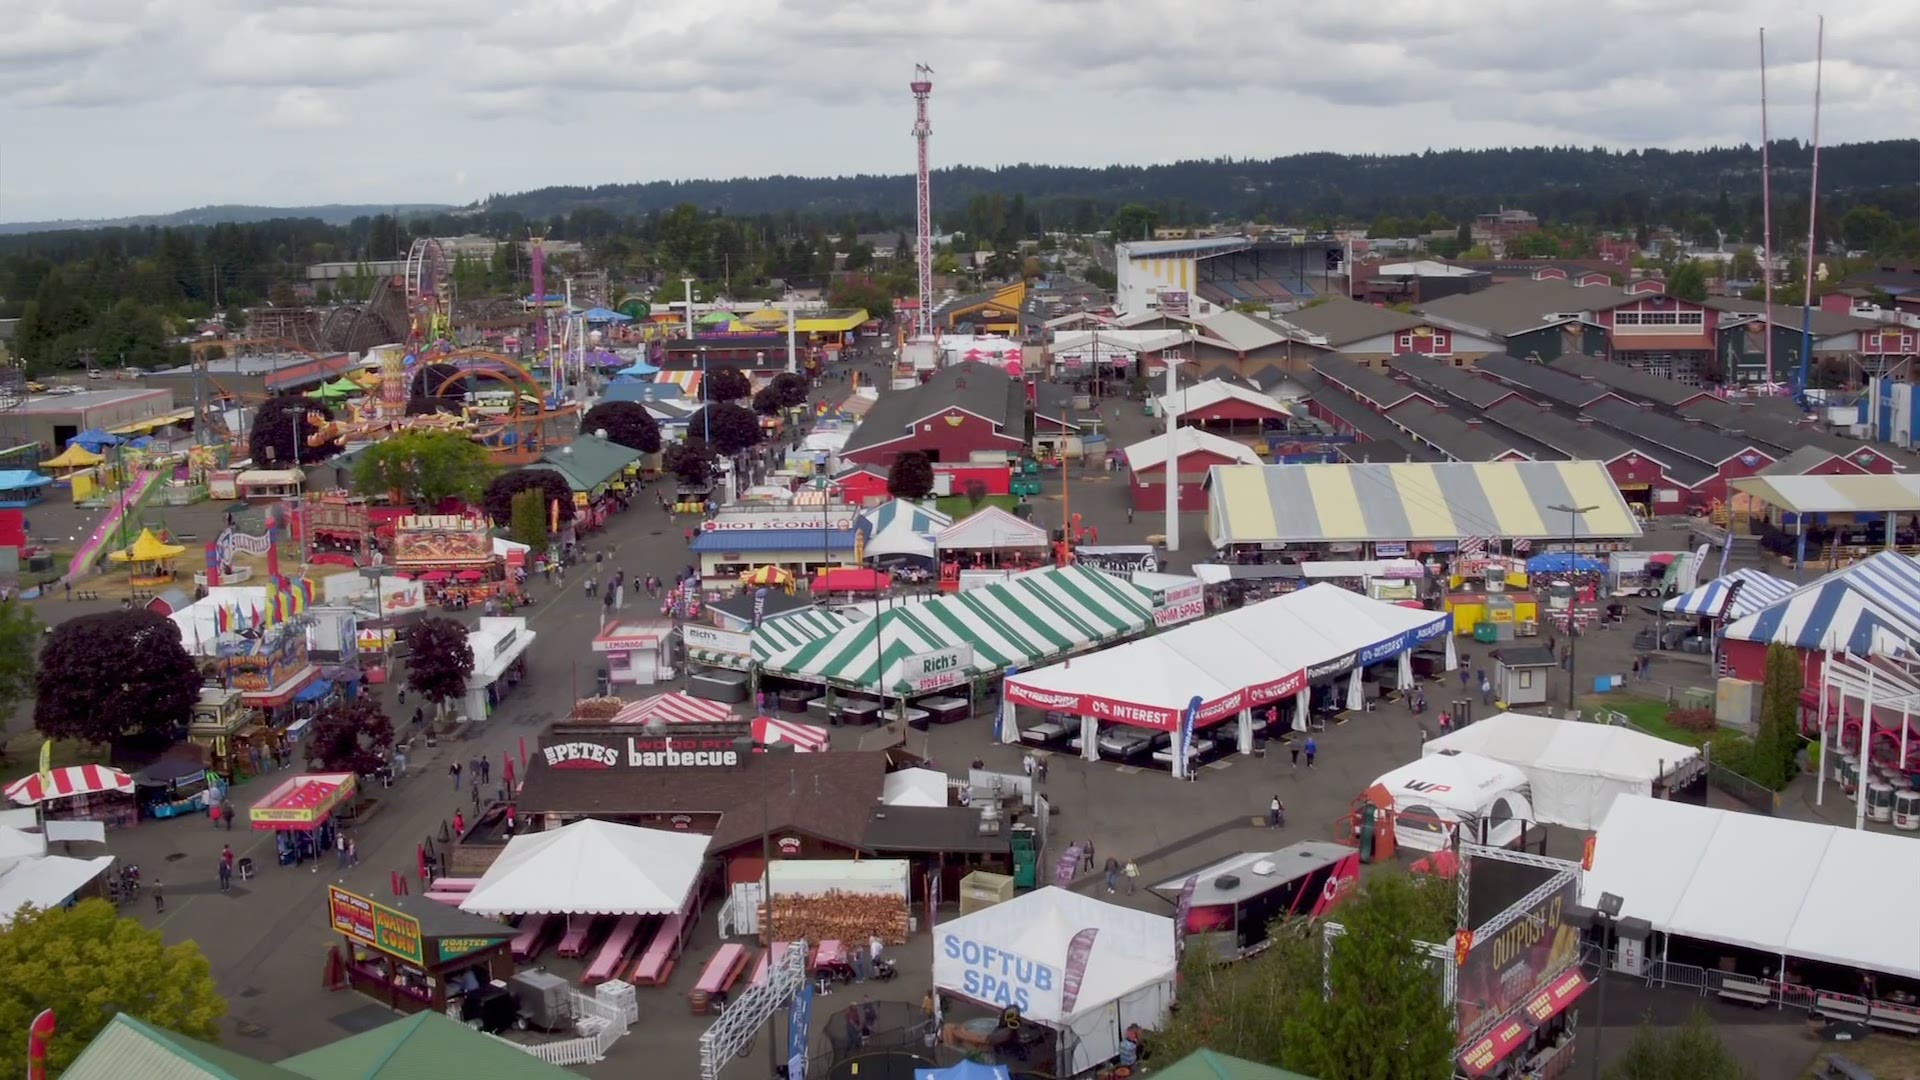 5 things to do at the Washington State Fair